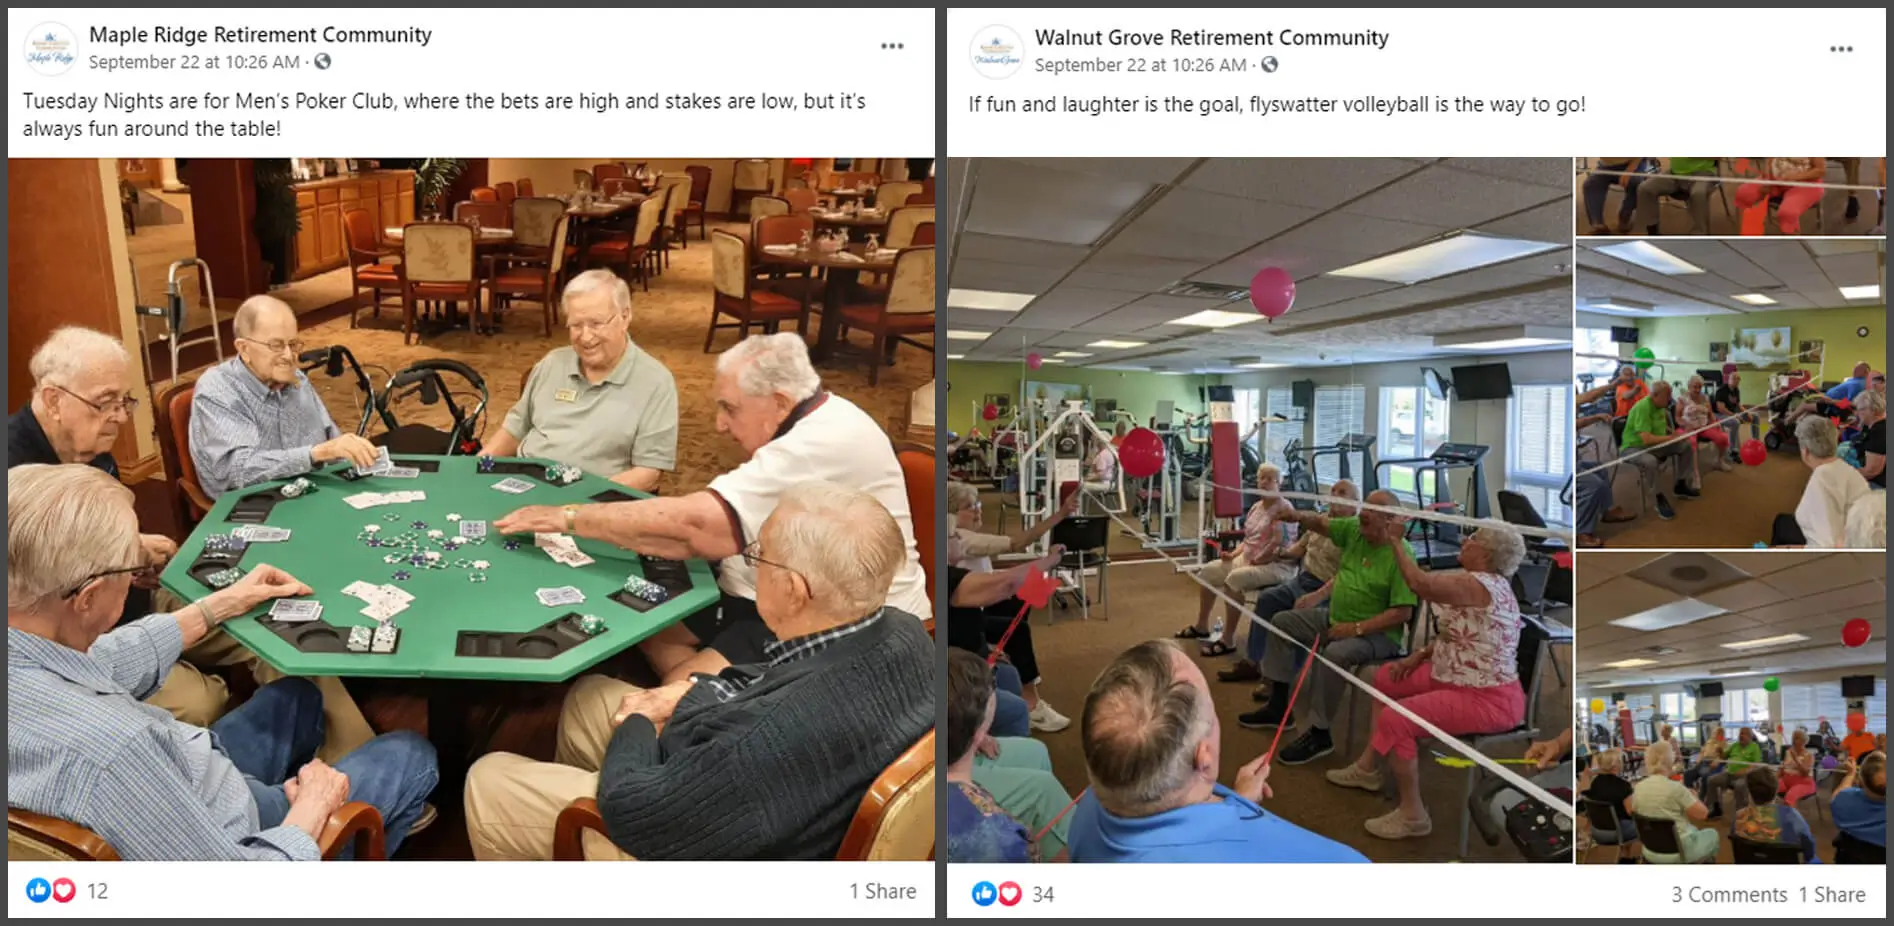 featured Facebook posts from Maple Ridge and Walnut Grove Retirement Communities